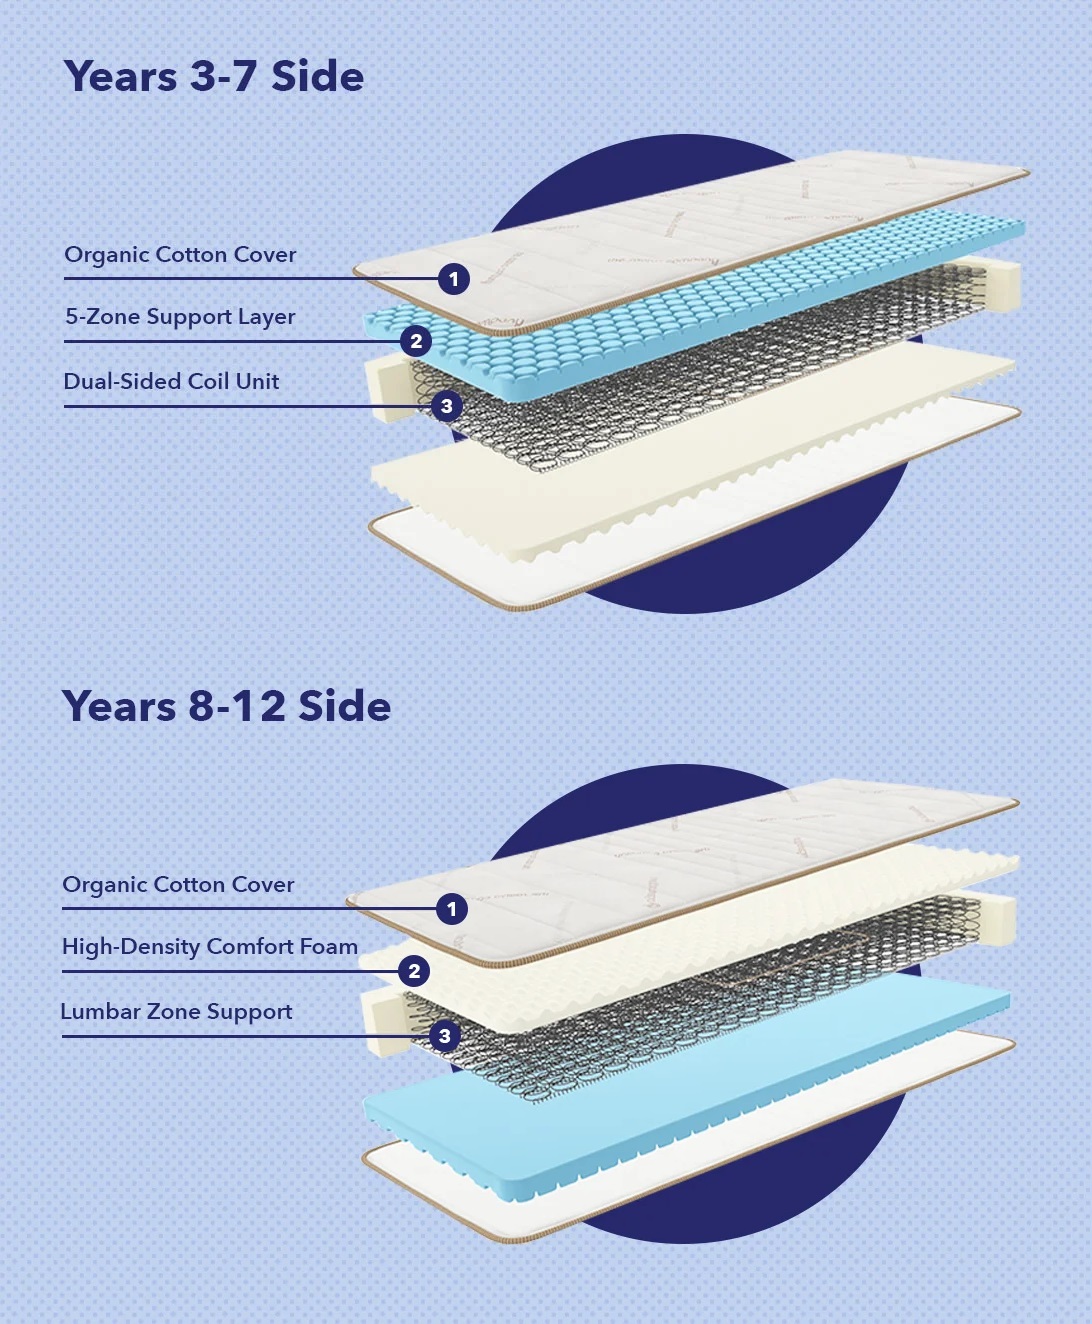 an infographic comparing the different layers of a Saatva youth mattress